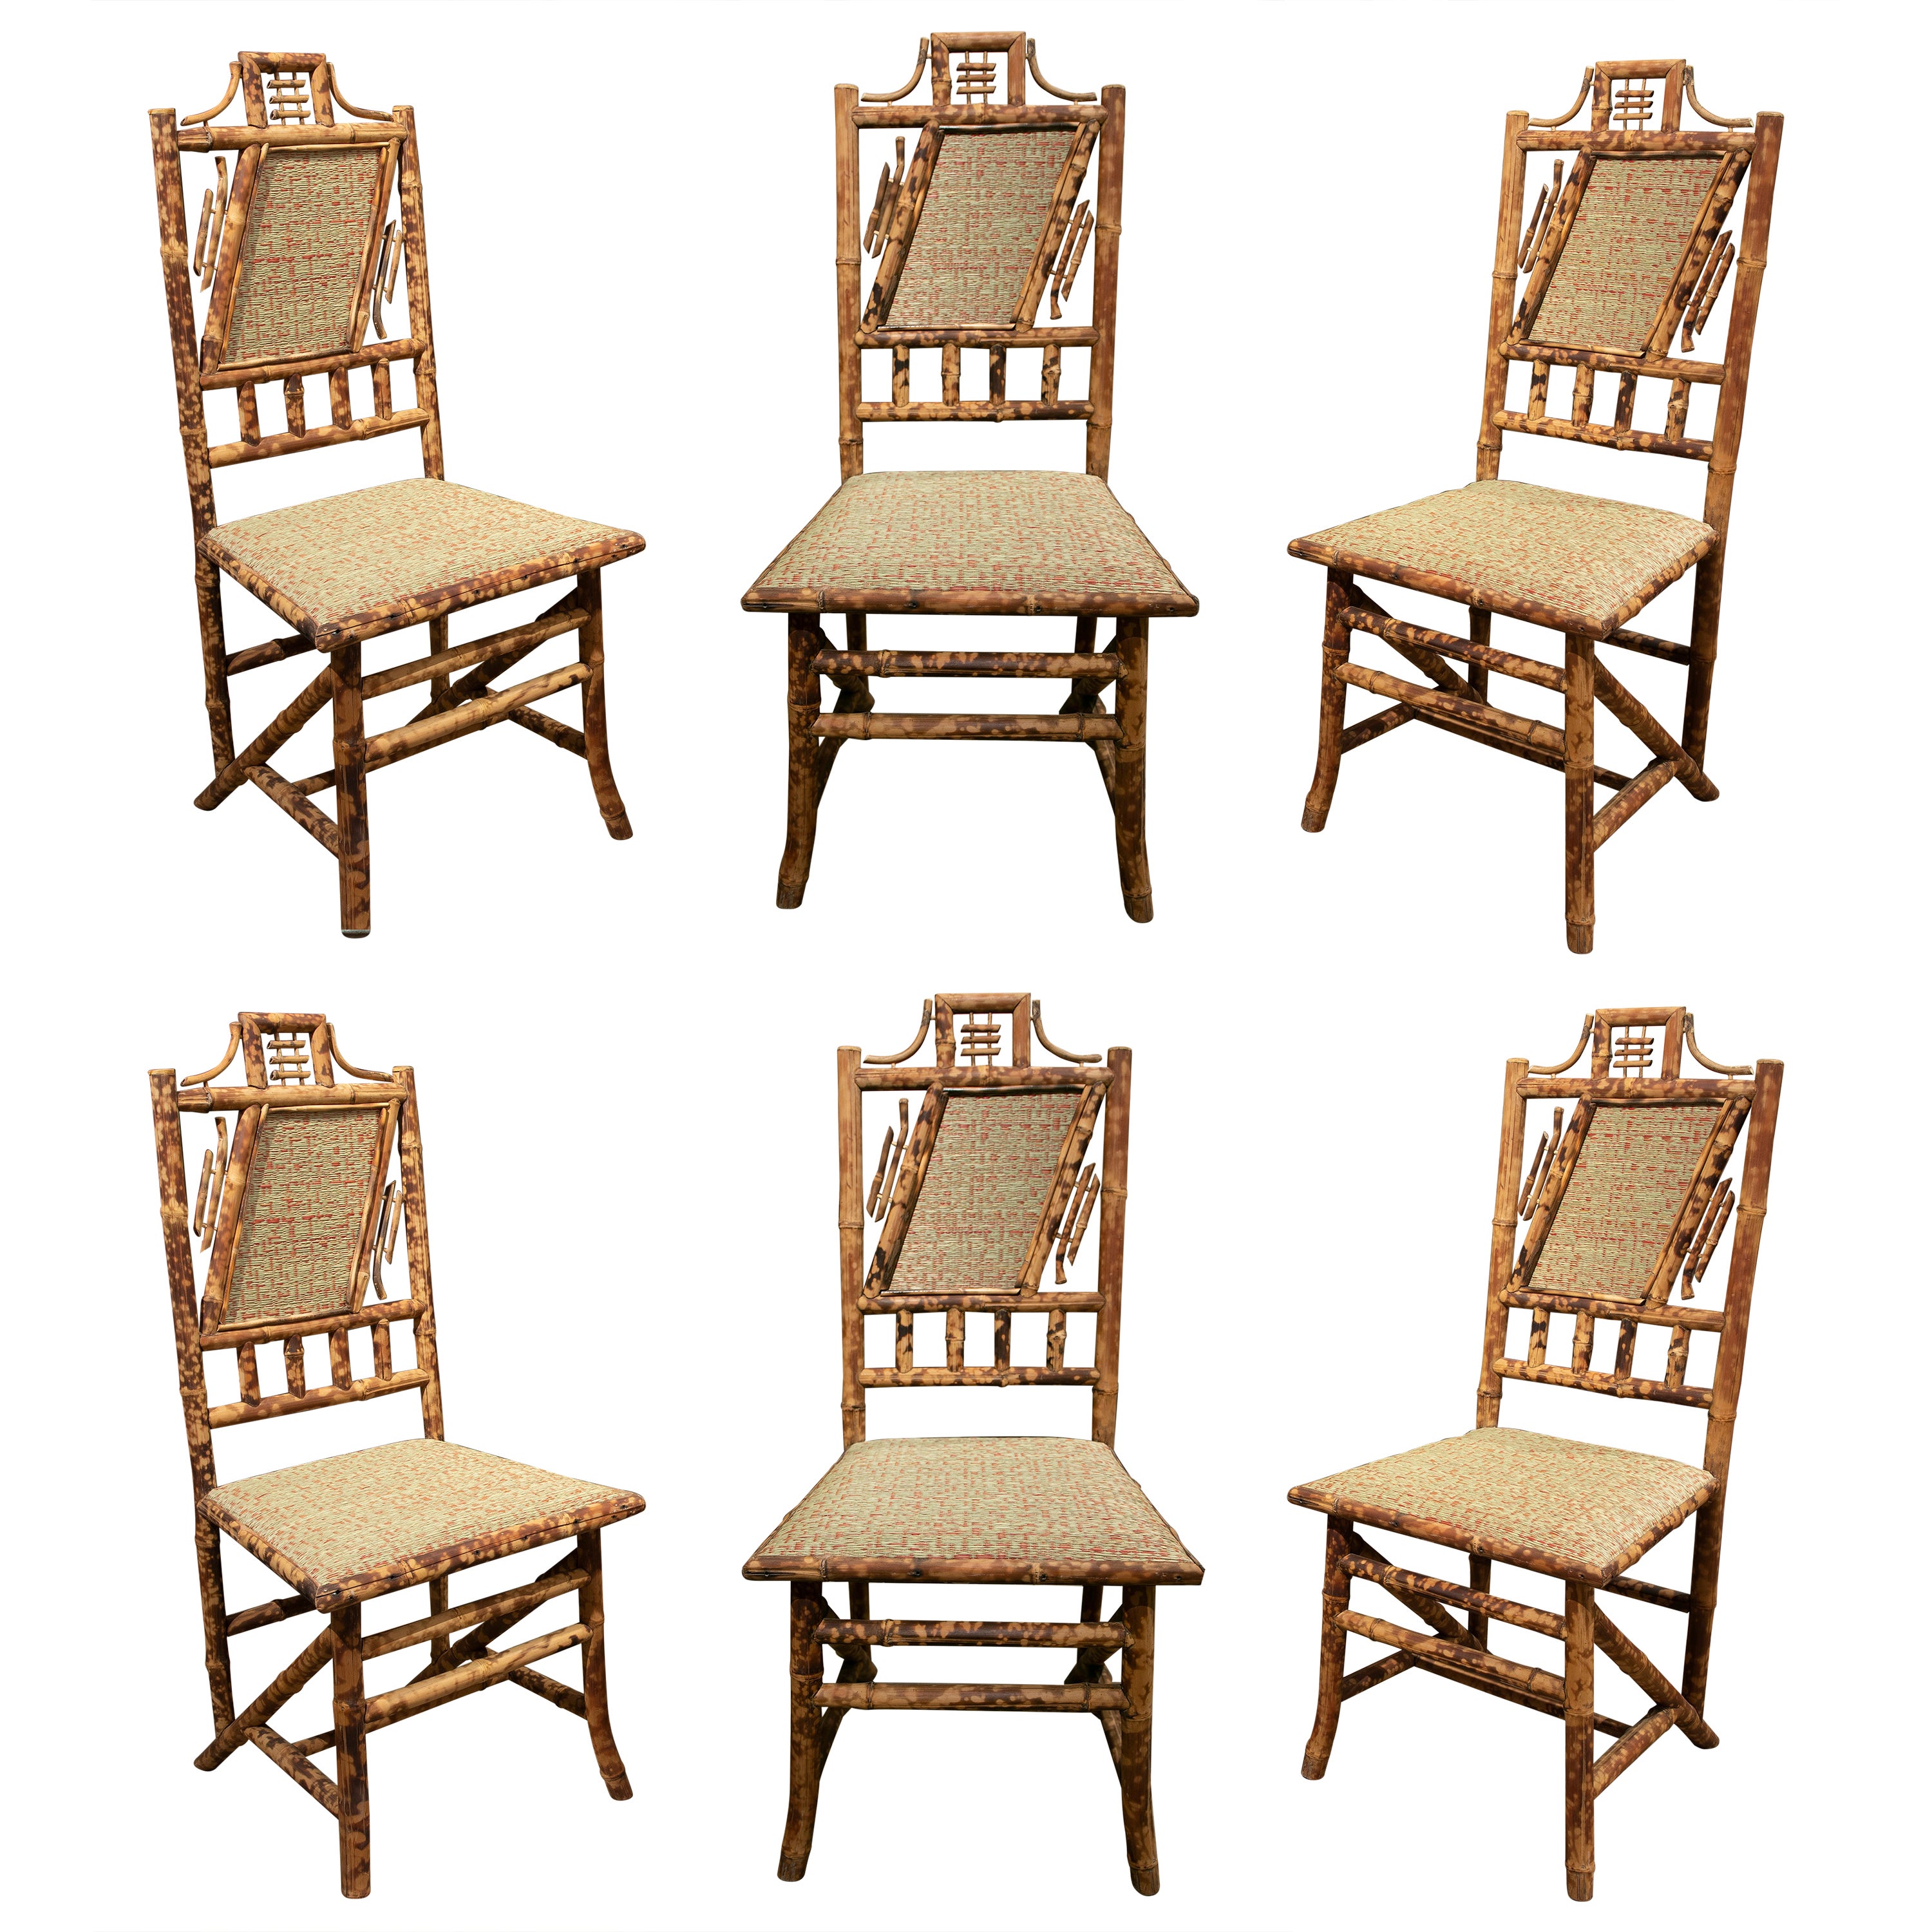 1950s Set of Six Bamboo Chairs with Natural Raffia Seat and Backrest